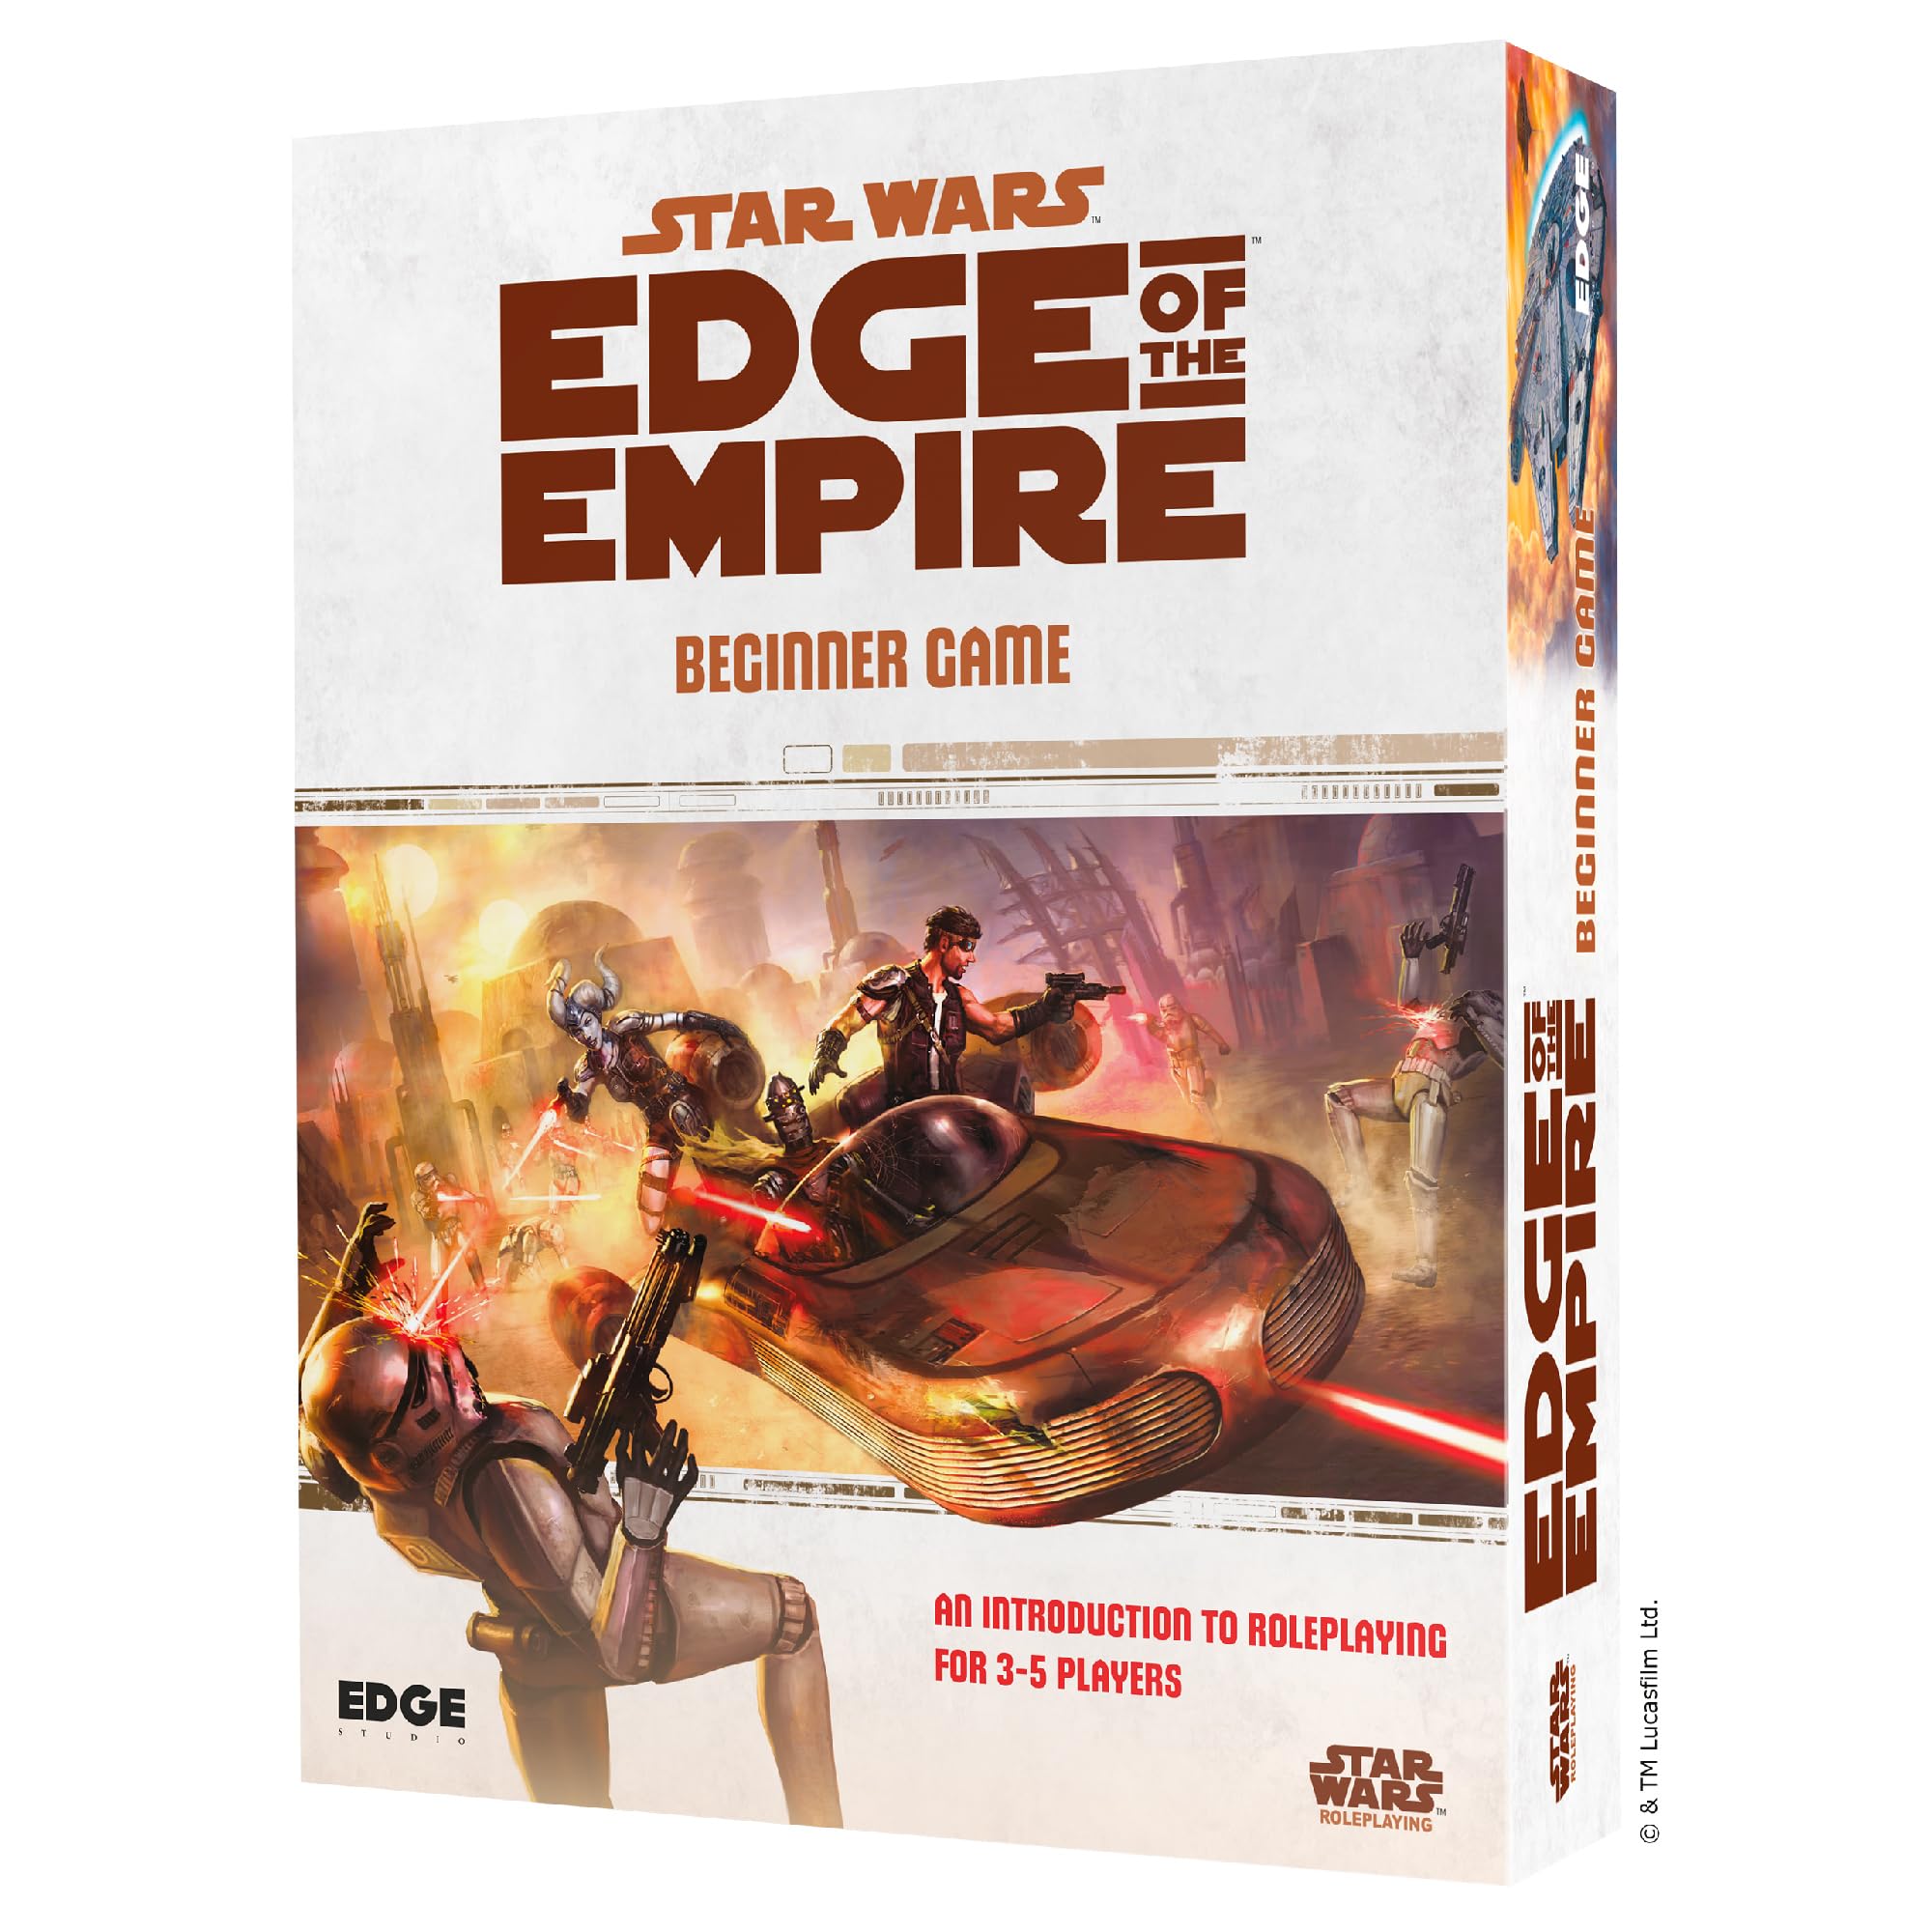 Star Wars - Edge of The Empire: Beginner Game - Embark on Galactic Adventures in a Complete Learn-As-You-Go Experience! Sci-Fi RPG, Ages 10+, 3-5 Players, 1 Hour Playtime, Made by EDGE Studio